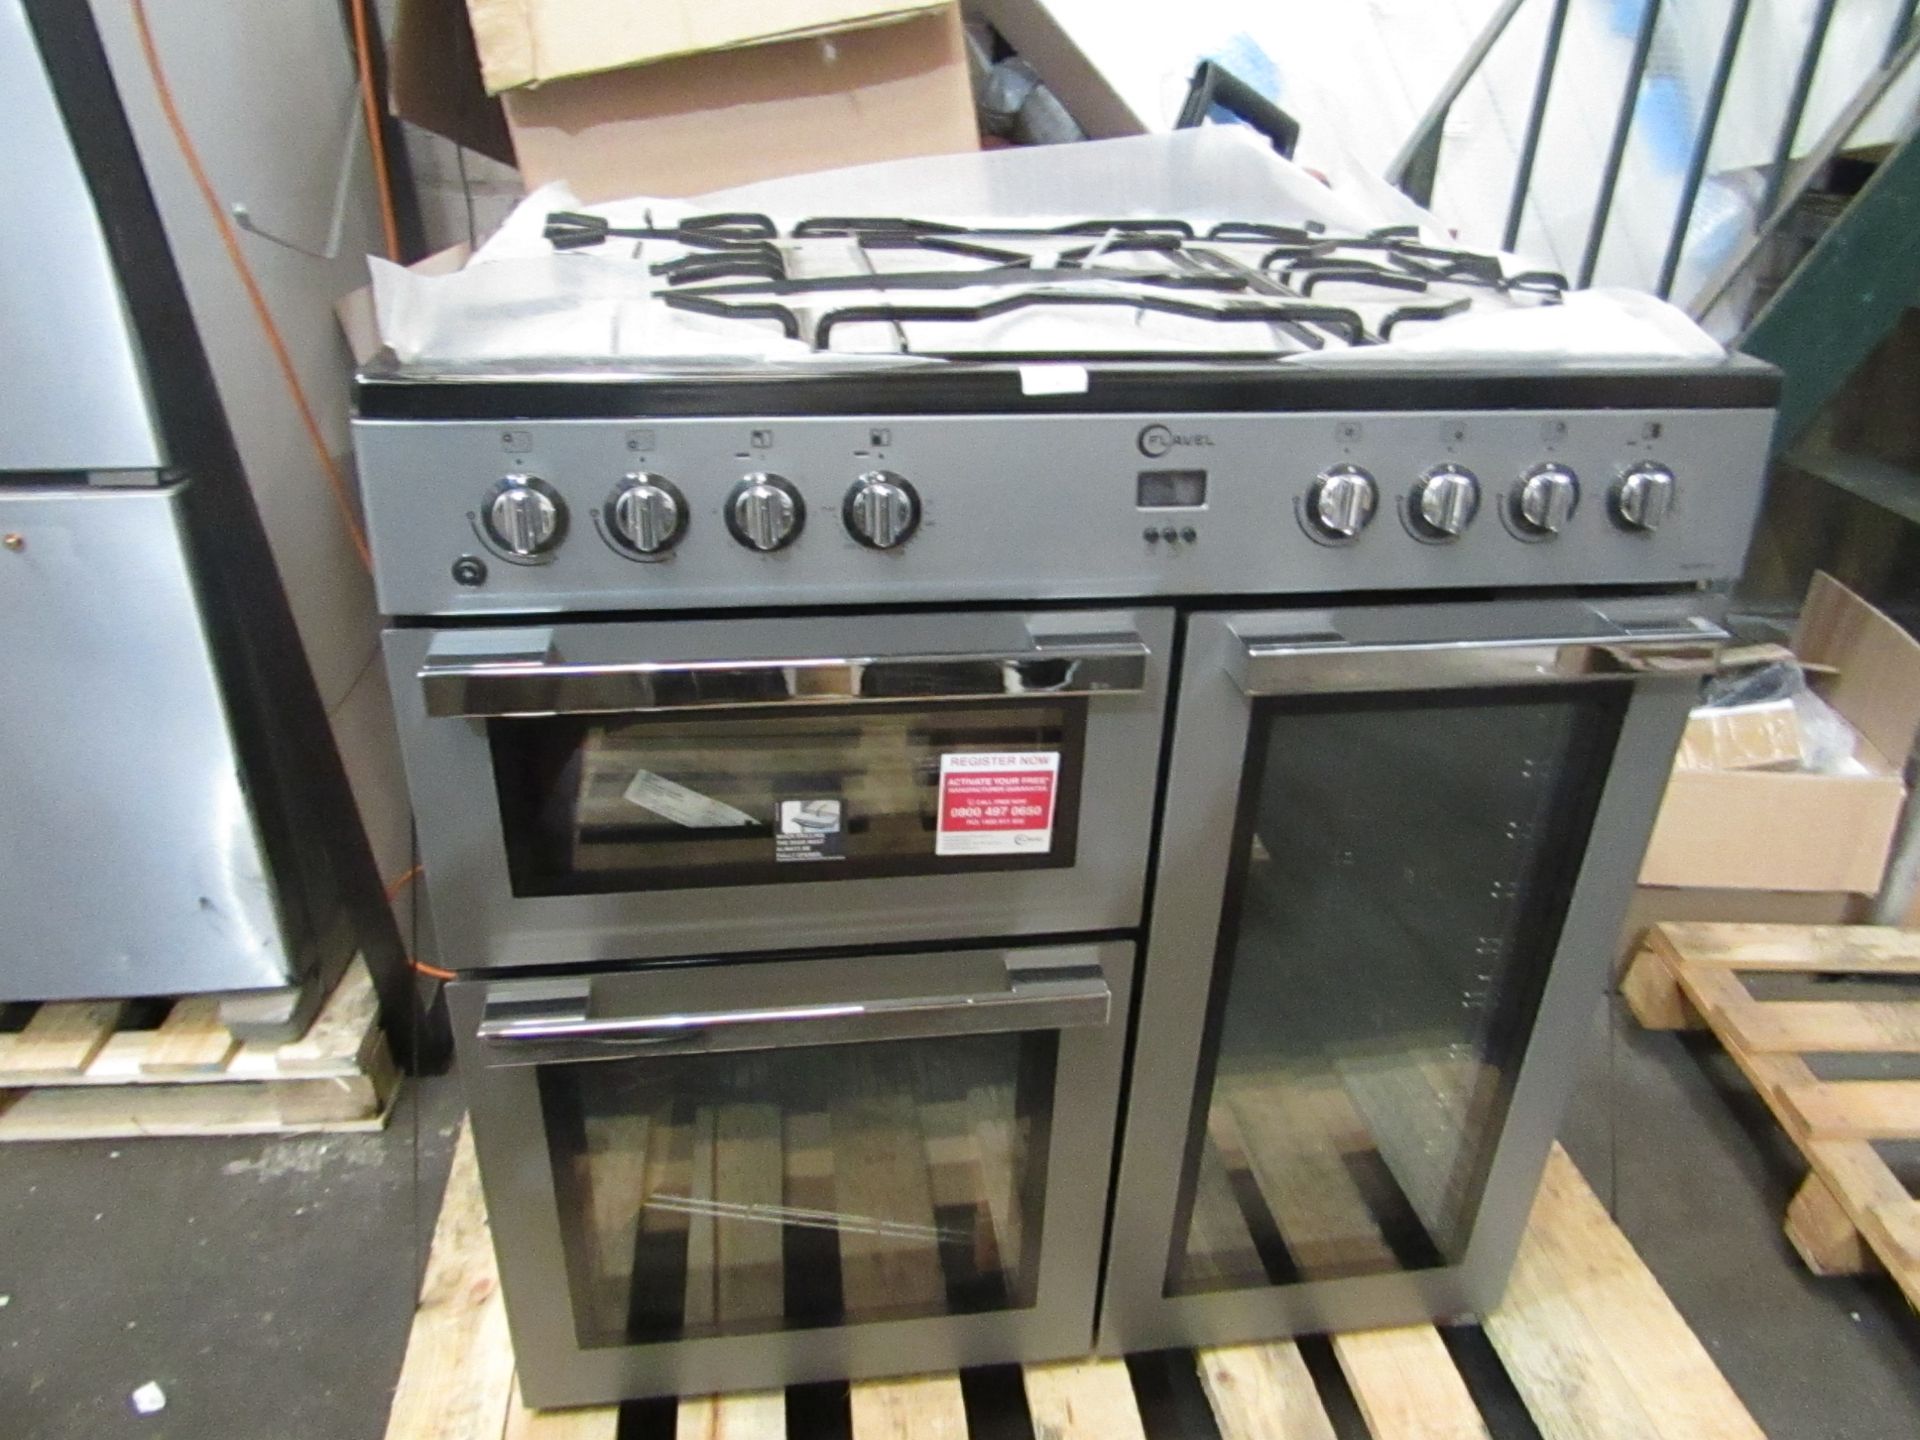 LEISURE 90cm Dual Fuel Range Cooker Anthracite CK90F530 RRP £879.00 - This product has been graded